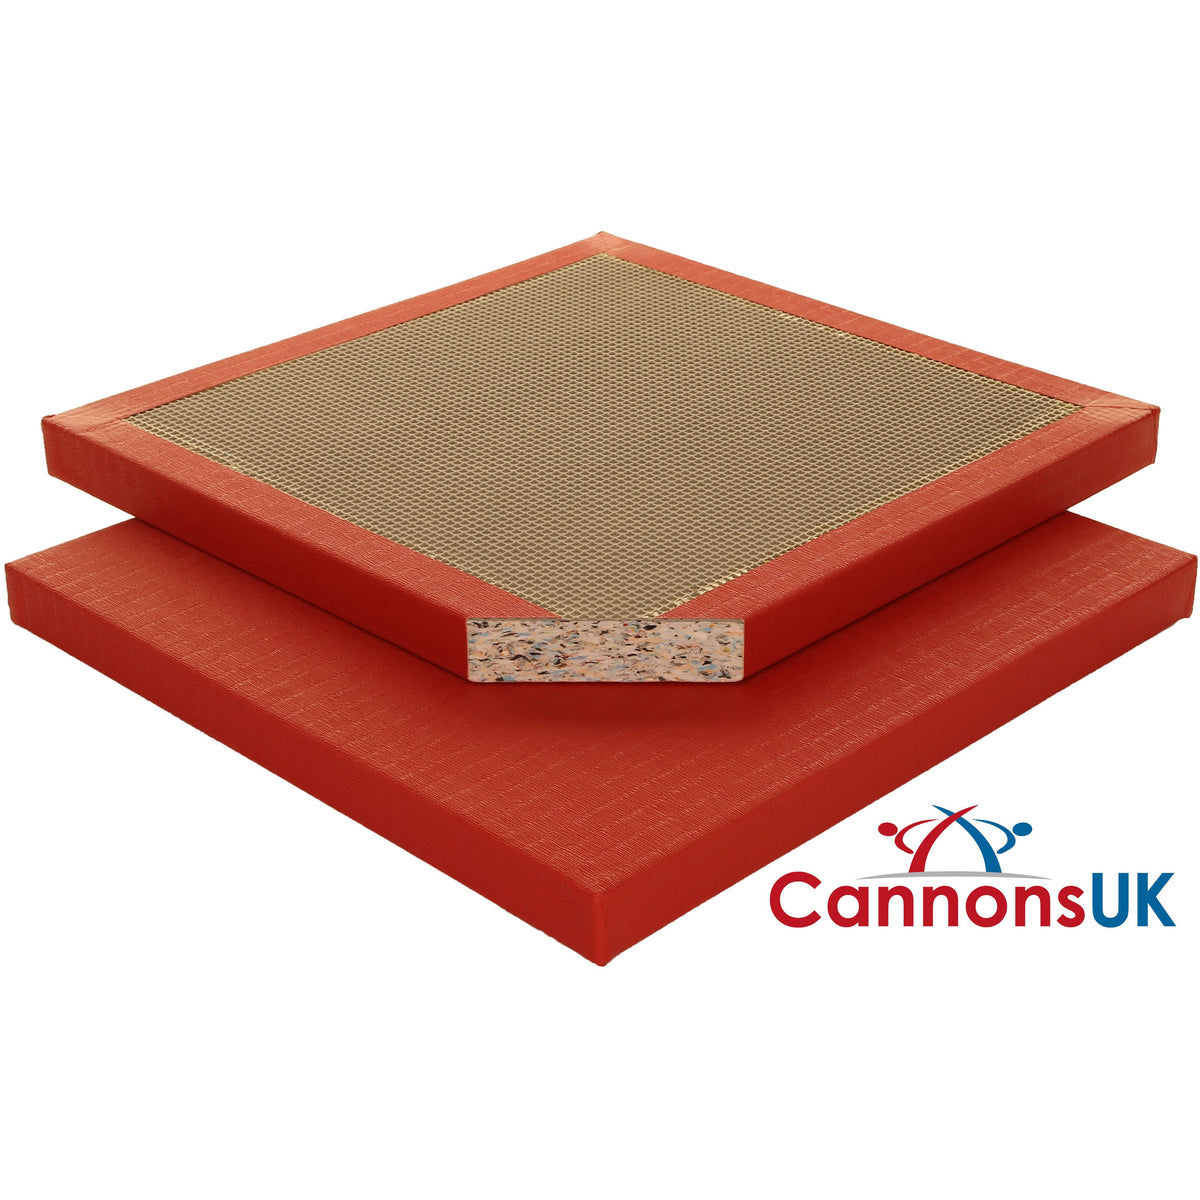 Cannons UK Contest Judo Mats 1m x 1m x 40mm - Cannons UK